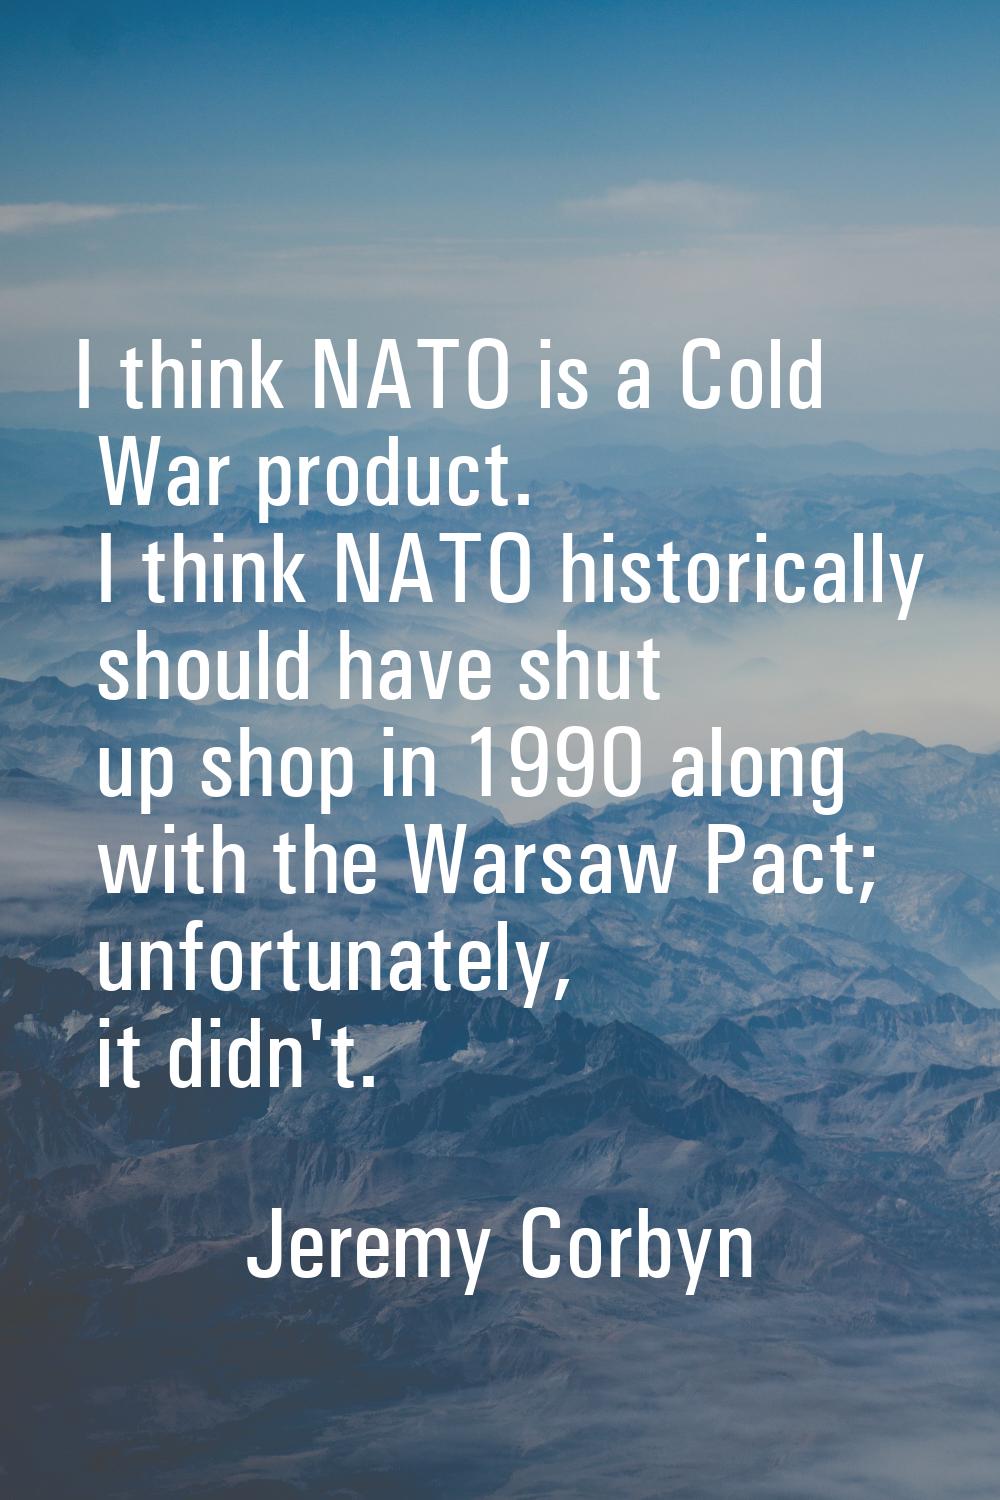 I think NATO is a Cold War product. I think NATO historically should have shut up shop in 1990 alon